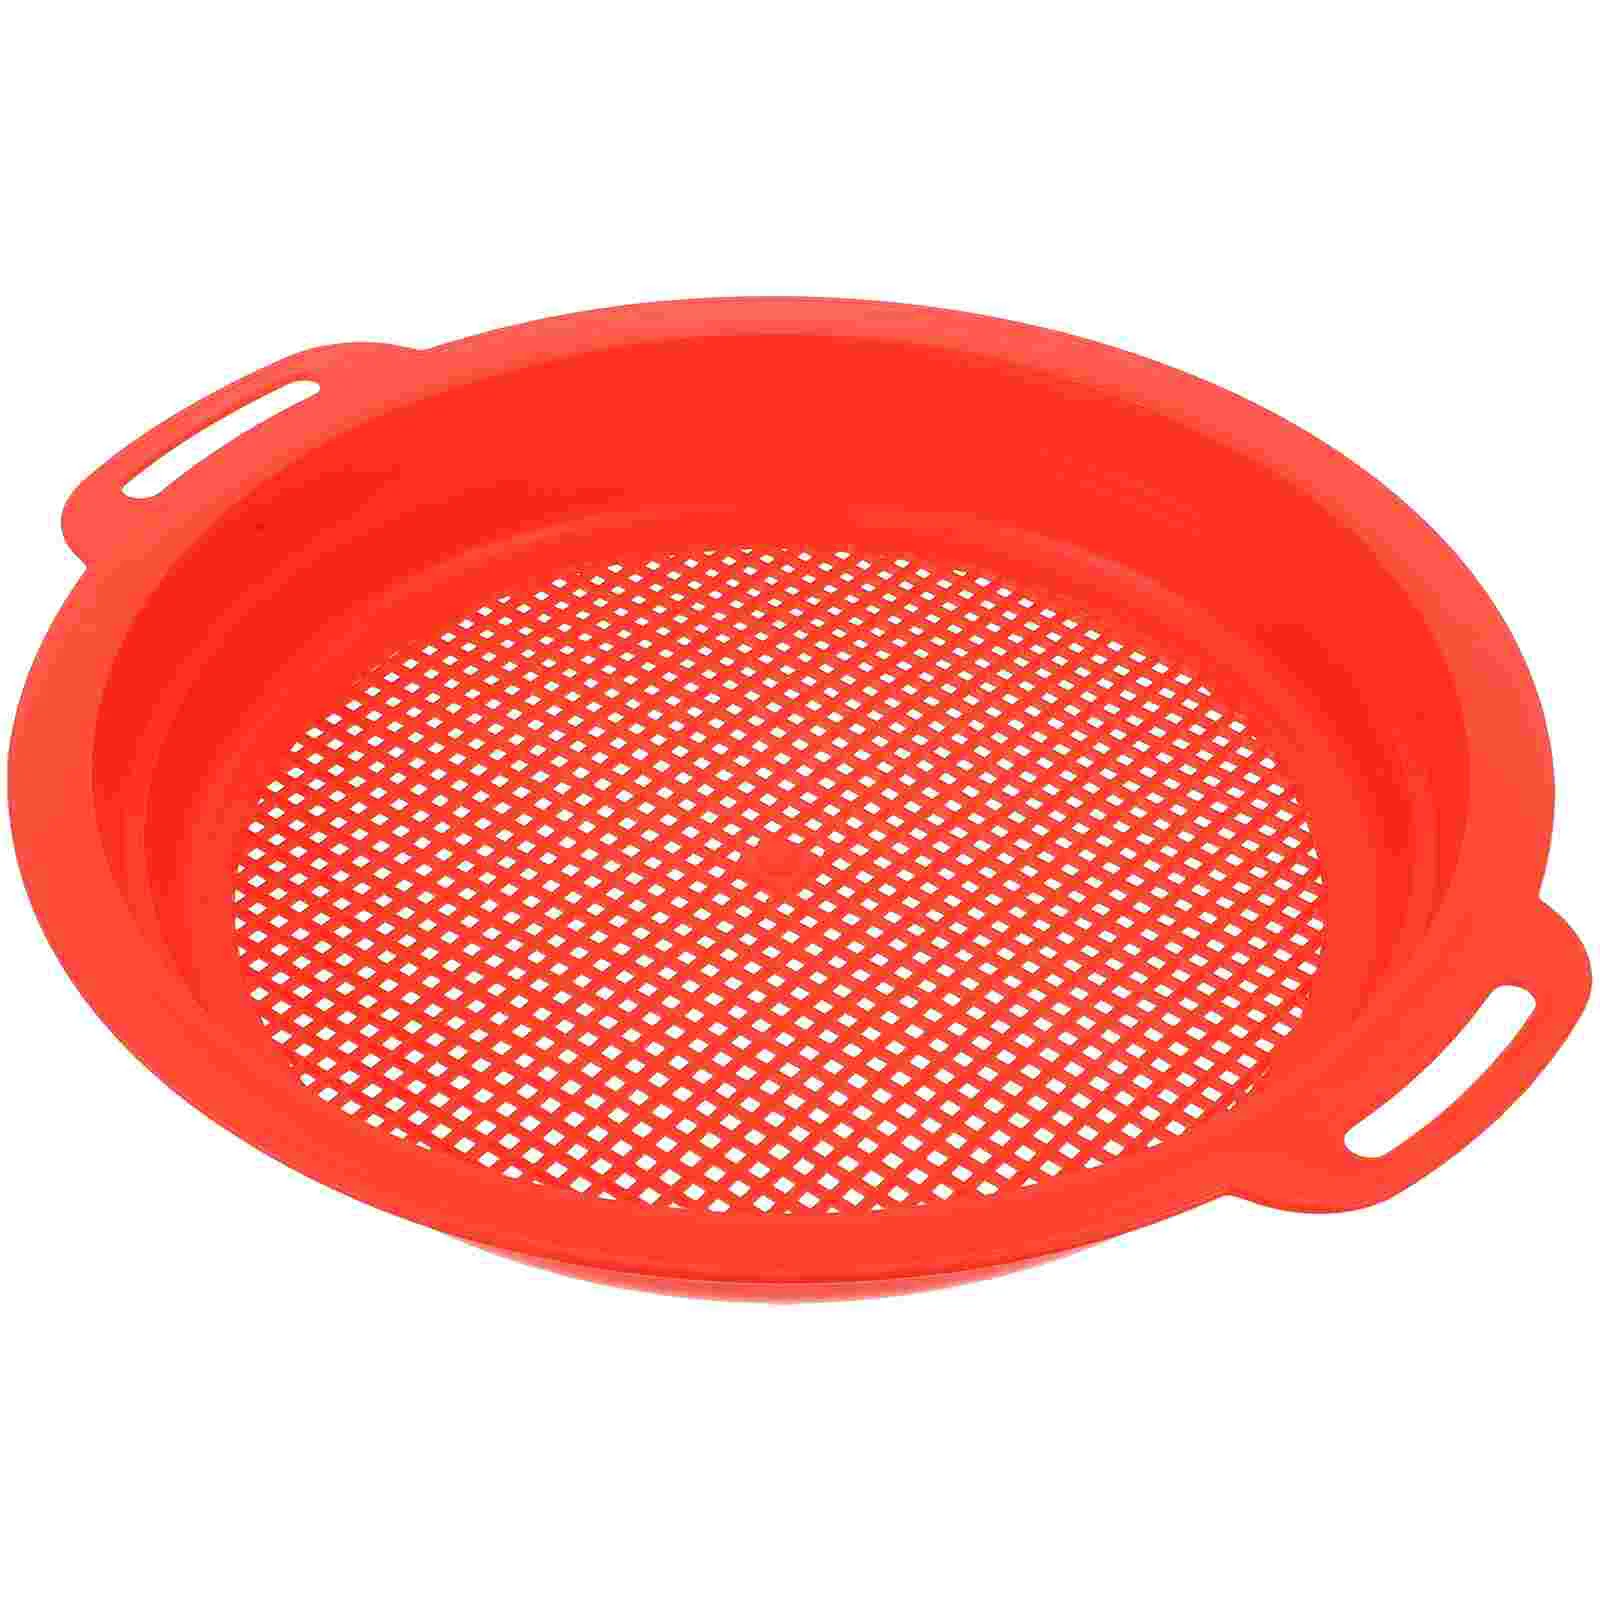 

Kids Sand Sifter Toy Sieves Toys Children Plastic Screen Mesh for The Beach Plaything